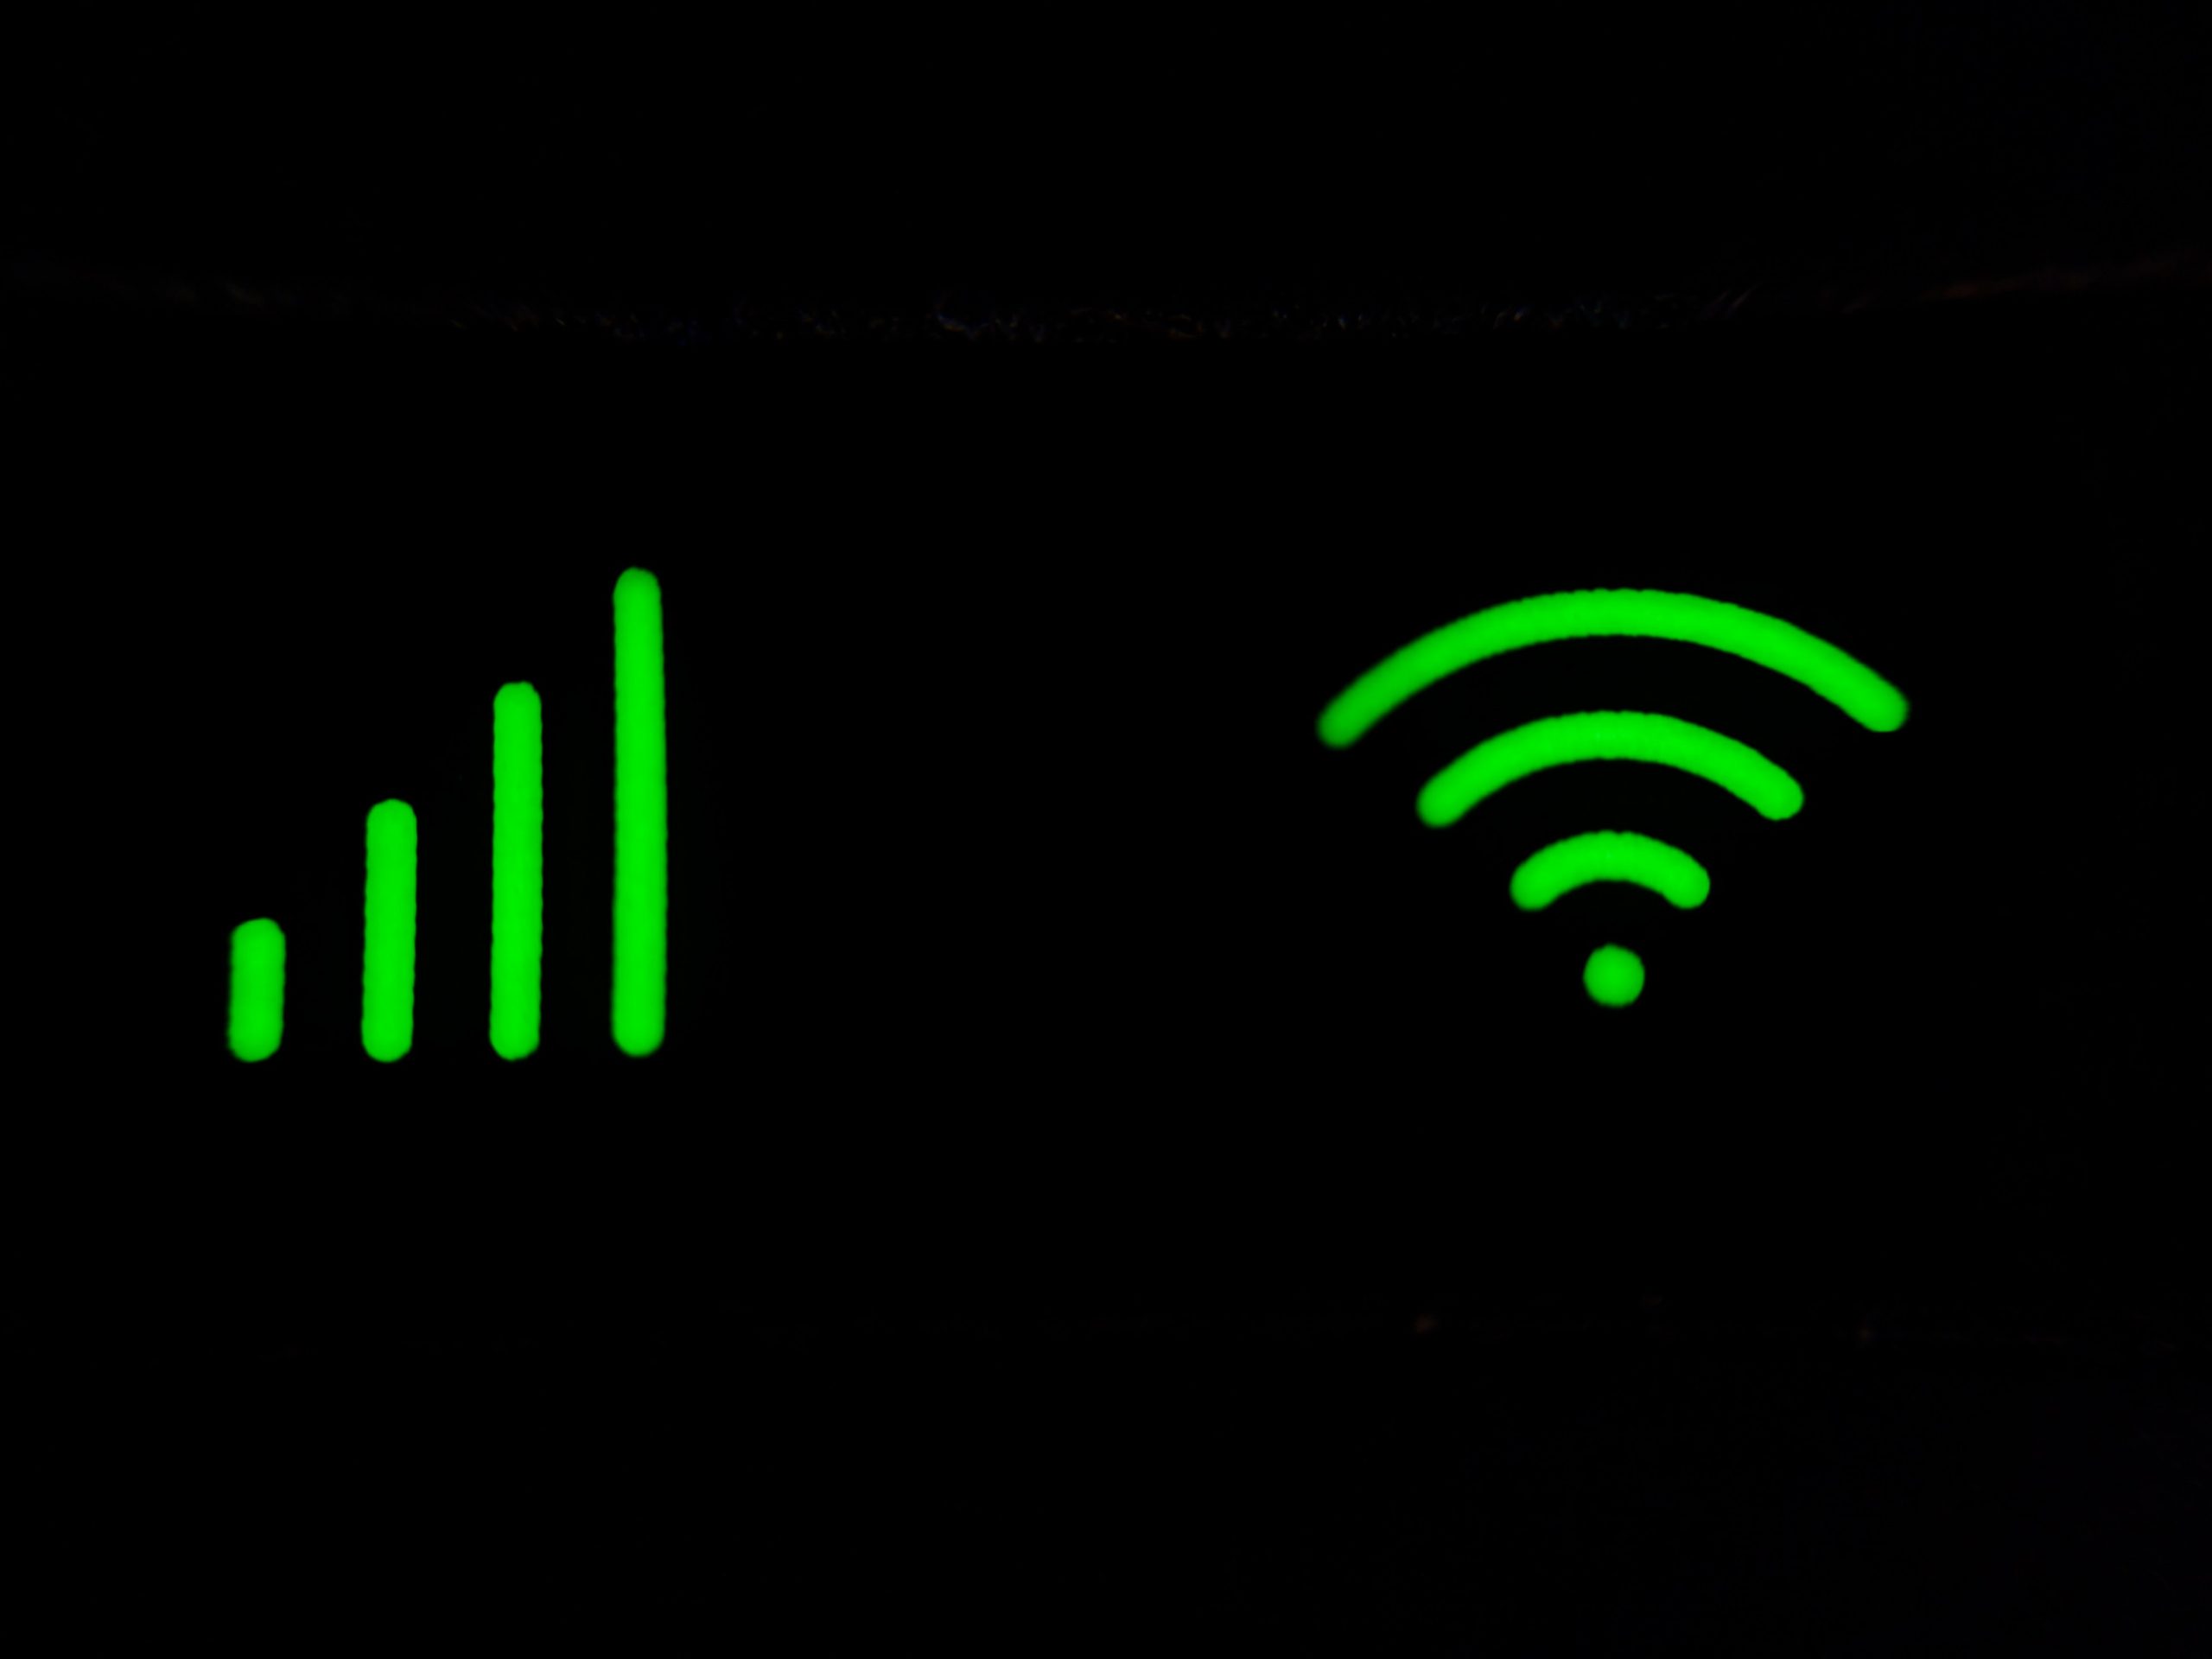 How To Download Music In 2022 - An image of signal strength indicators.